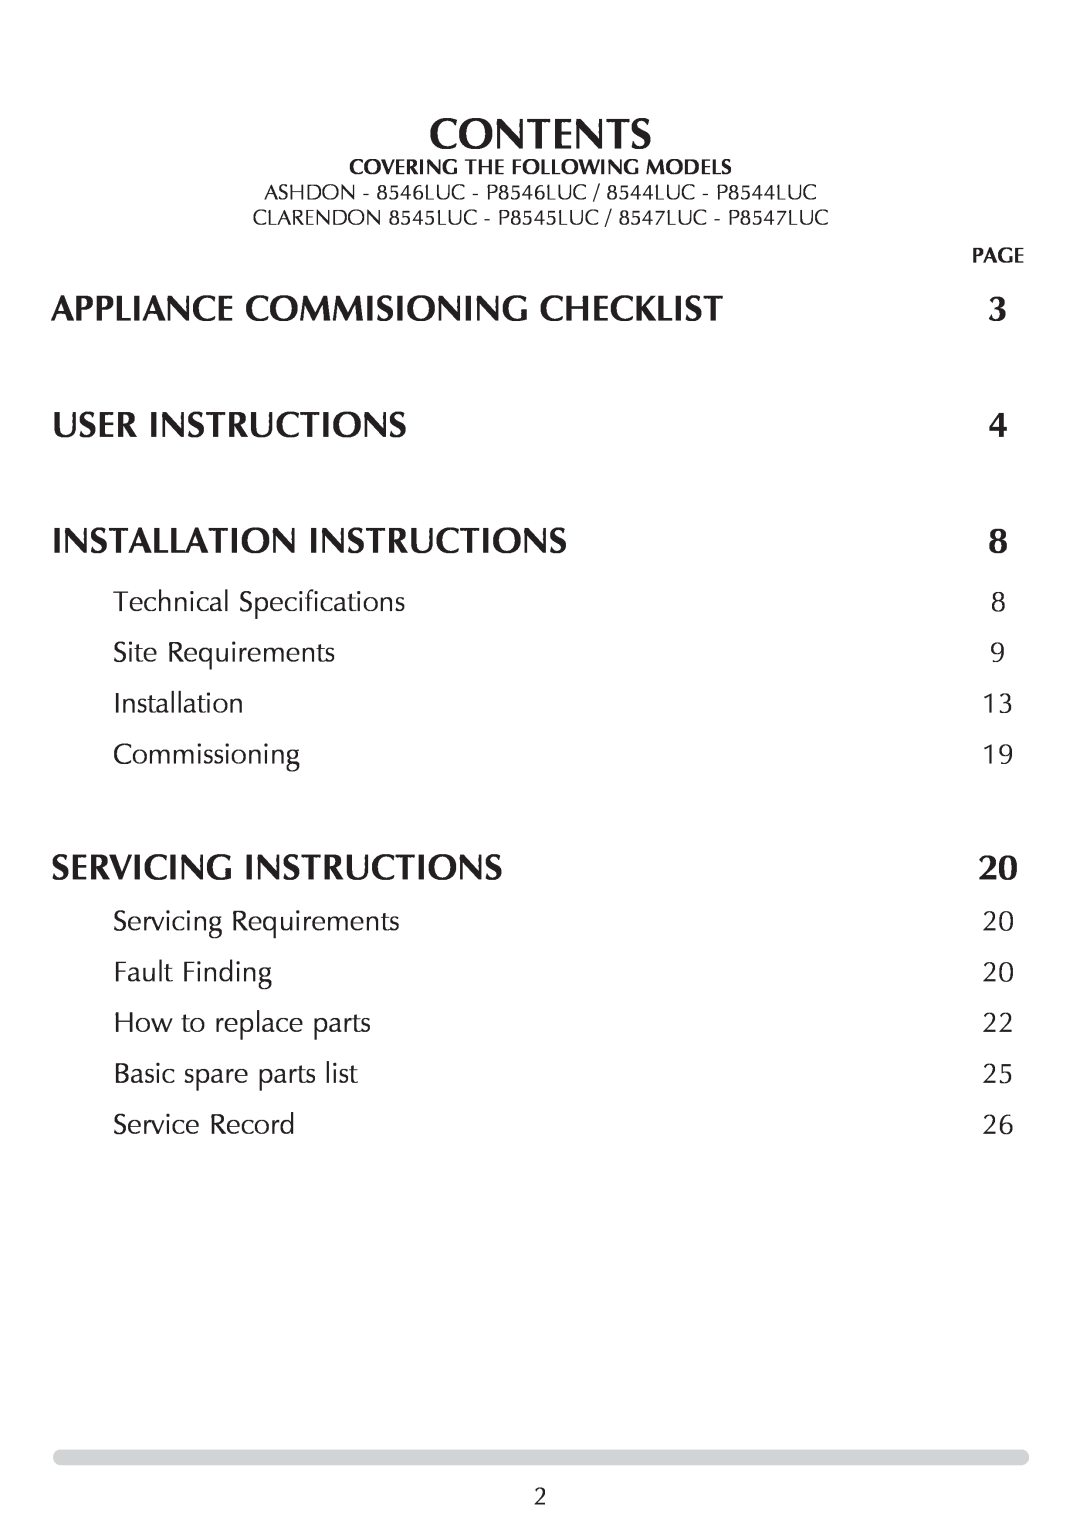 Stovax 8547LUC-P8547LUC Contents, Appliance Commisioning Checklist, User Instructions, Installation Instructions, Page 